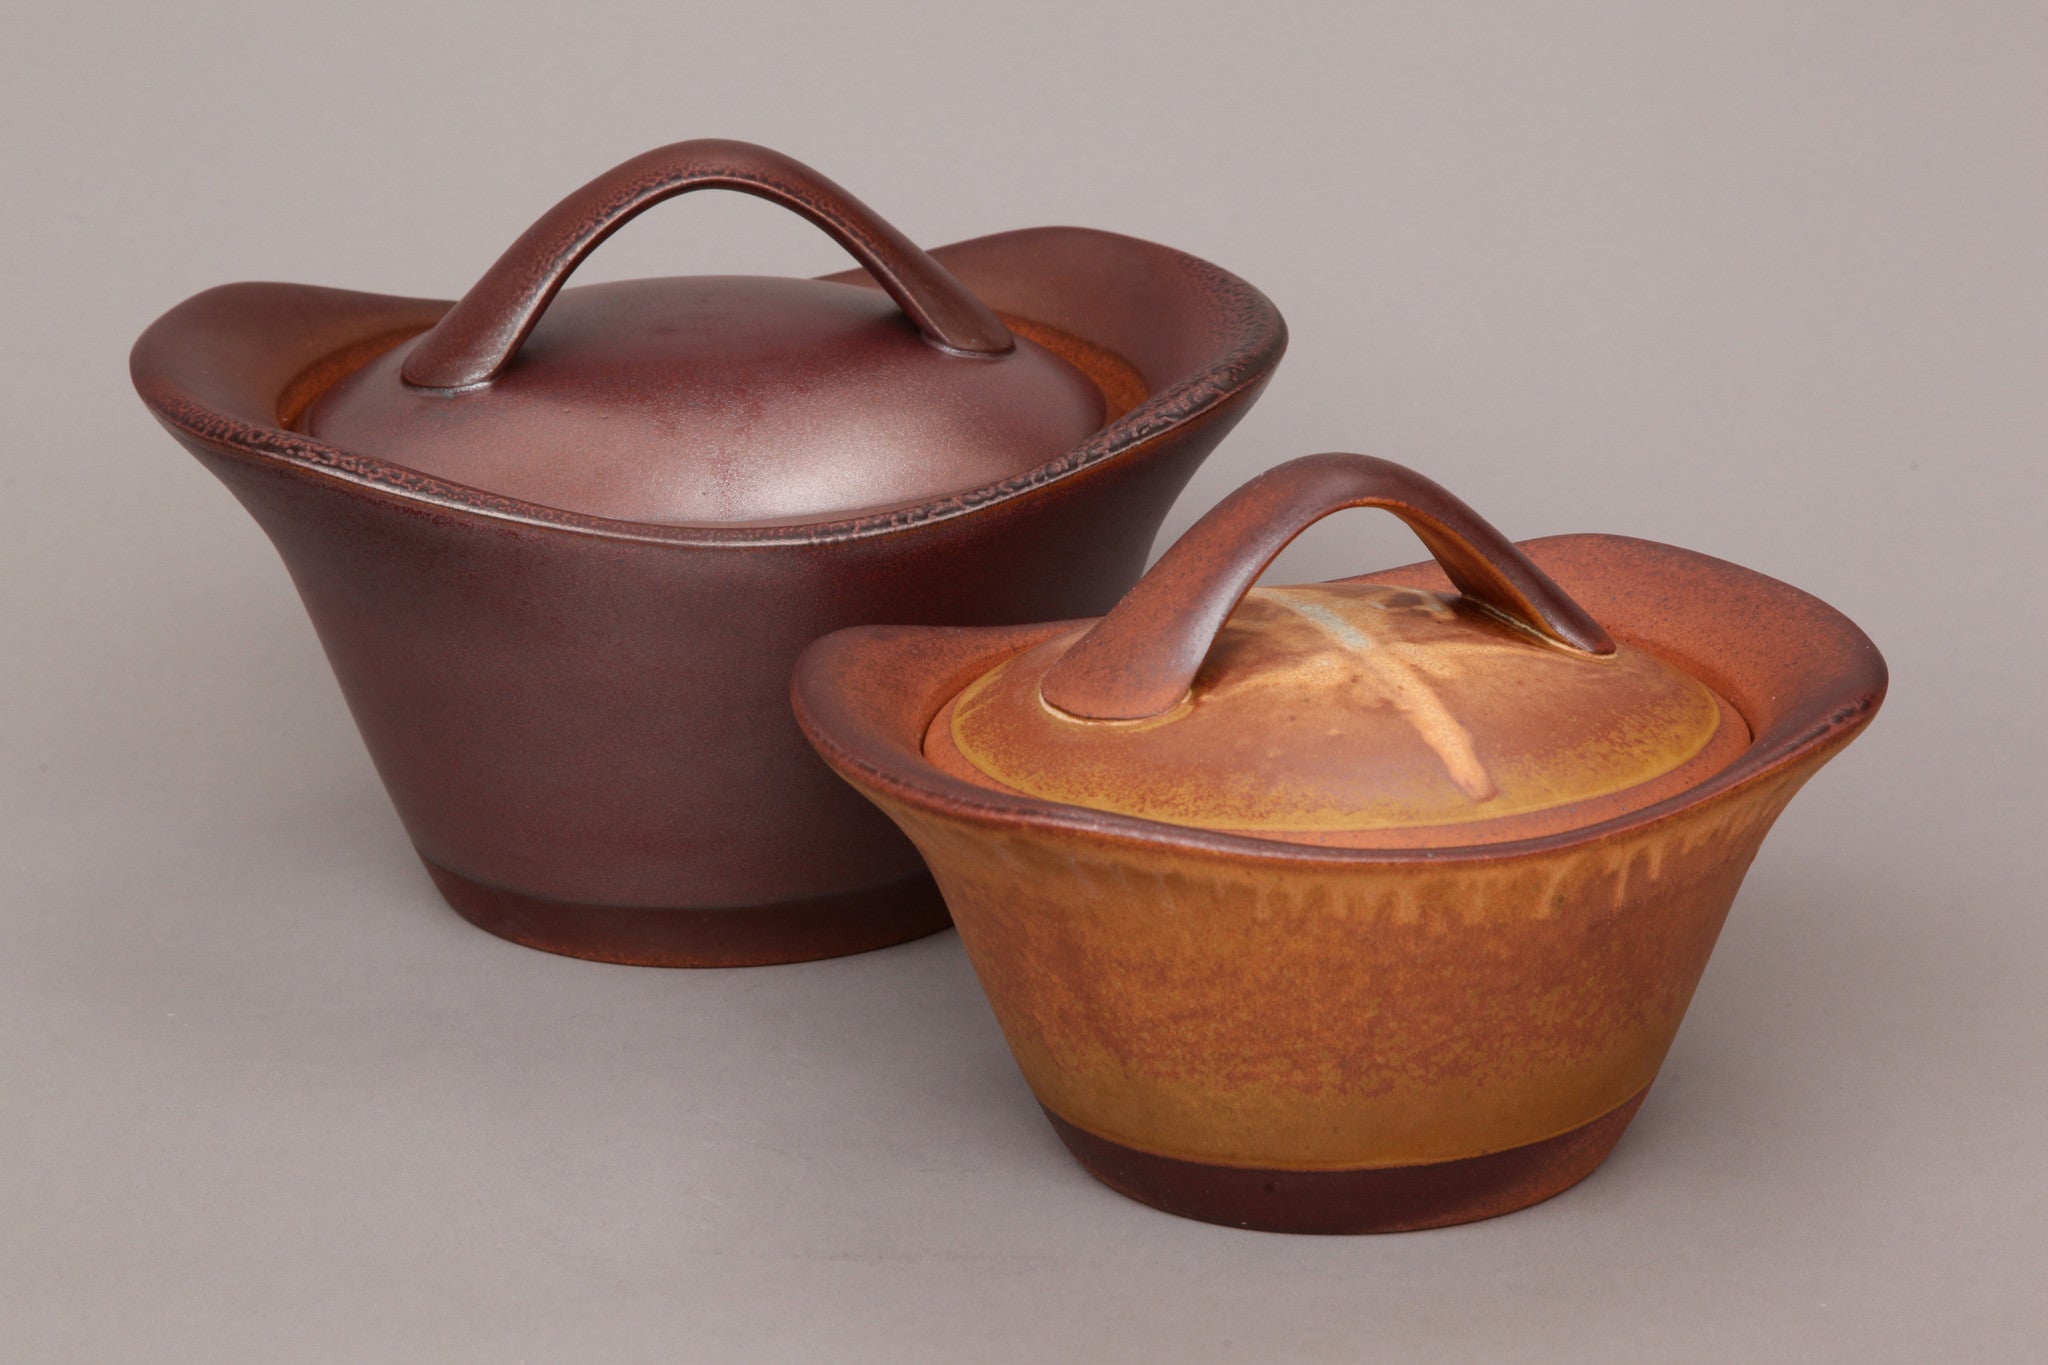 Veggie Steamer for 2 Servings - Flameware and Stoneware Clay Pots